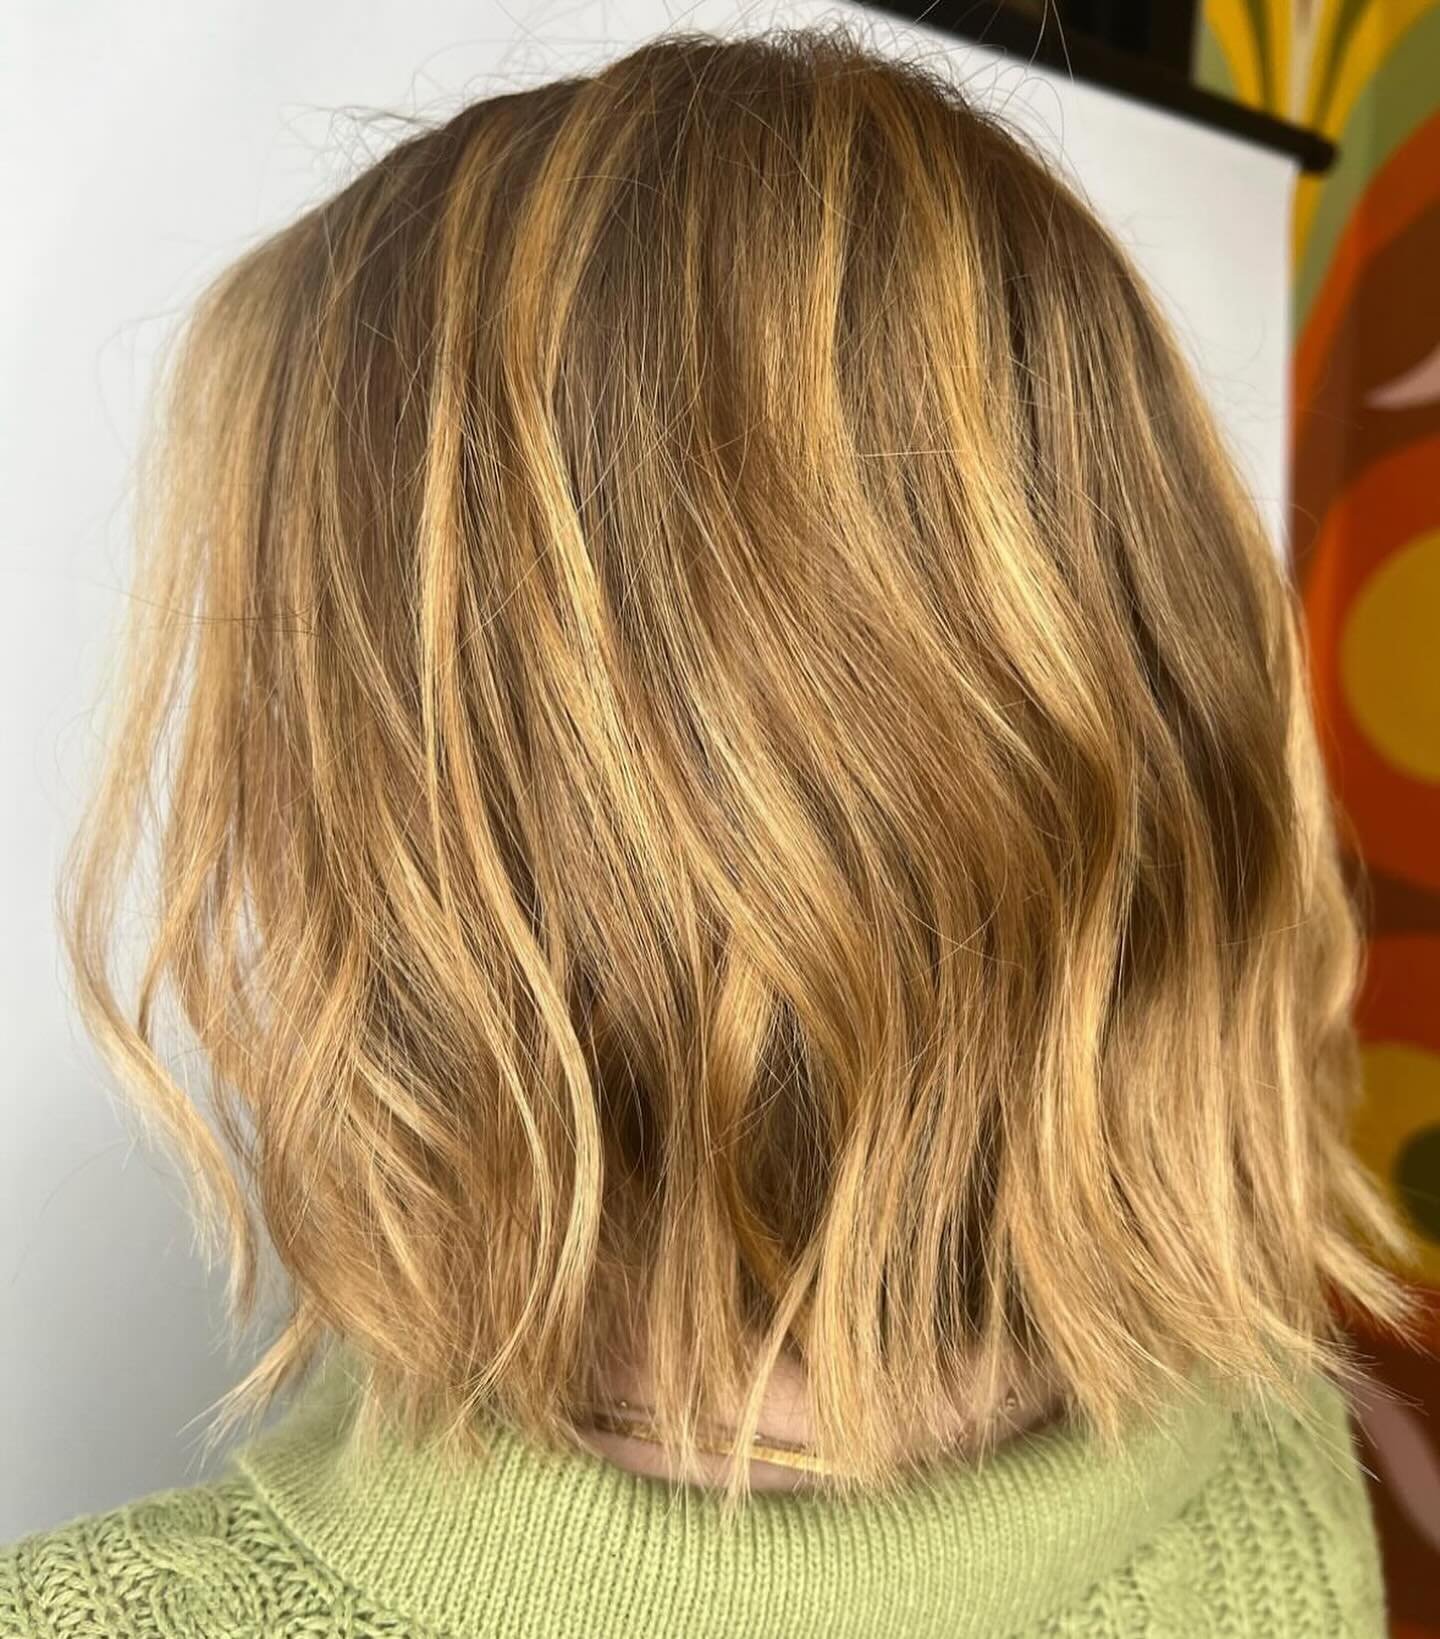 @ethanmatthewhair with a stunning honey blonde balayage and an example of how indoor vs outdoor lighting can affect pictures!
First photo is warm from indoor lighting.
2nd photo is outdoors in somewhat cloudy lighting! 
3rd photo is the before photo!